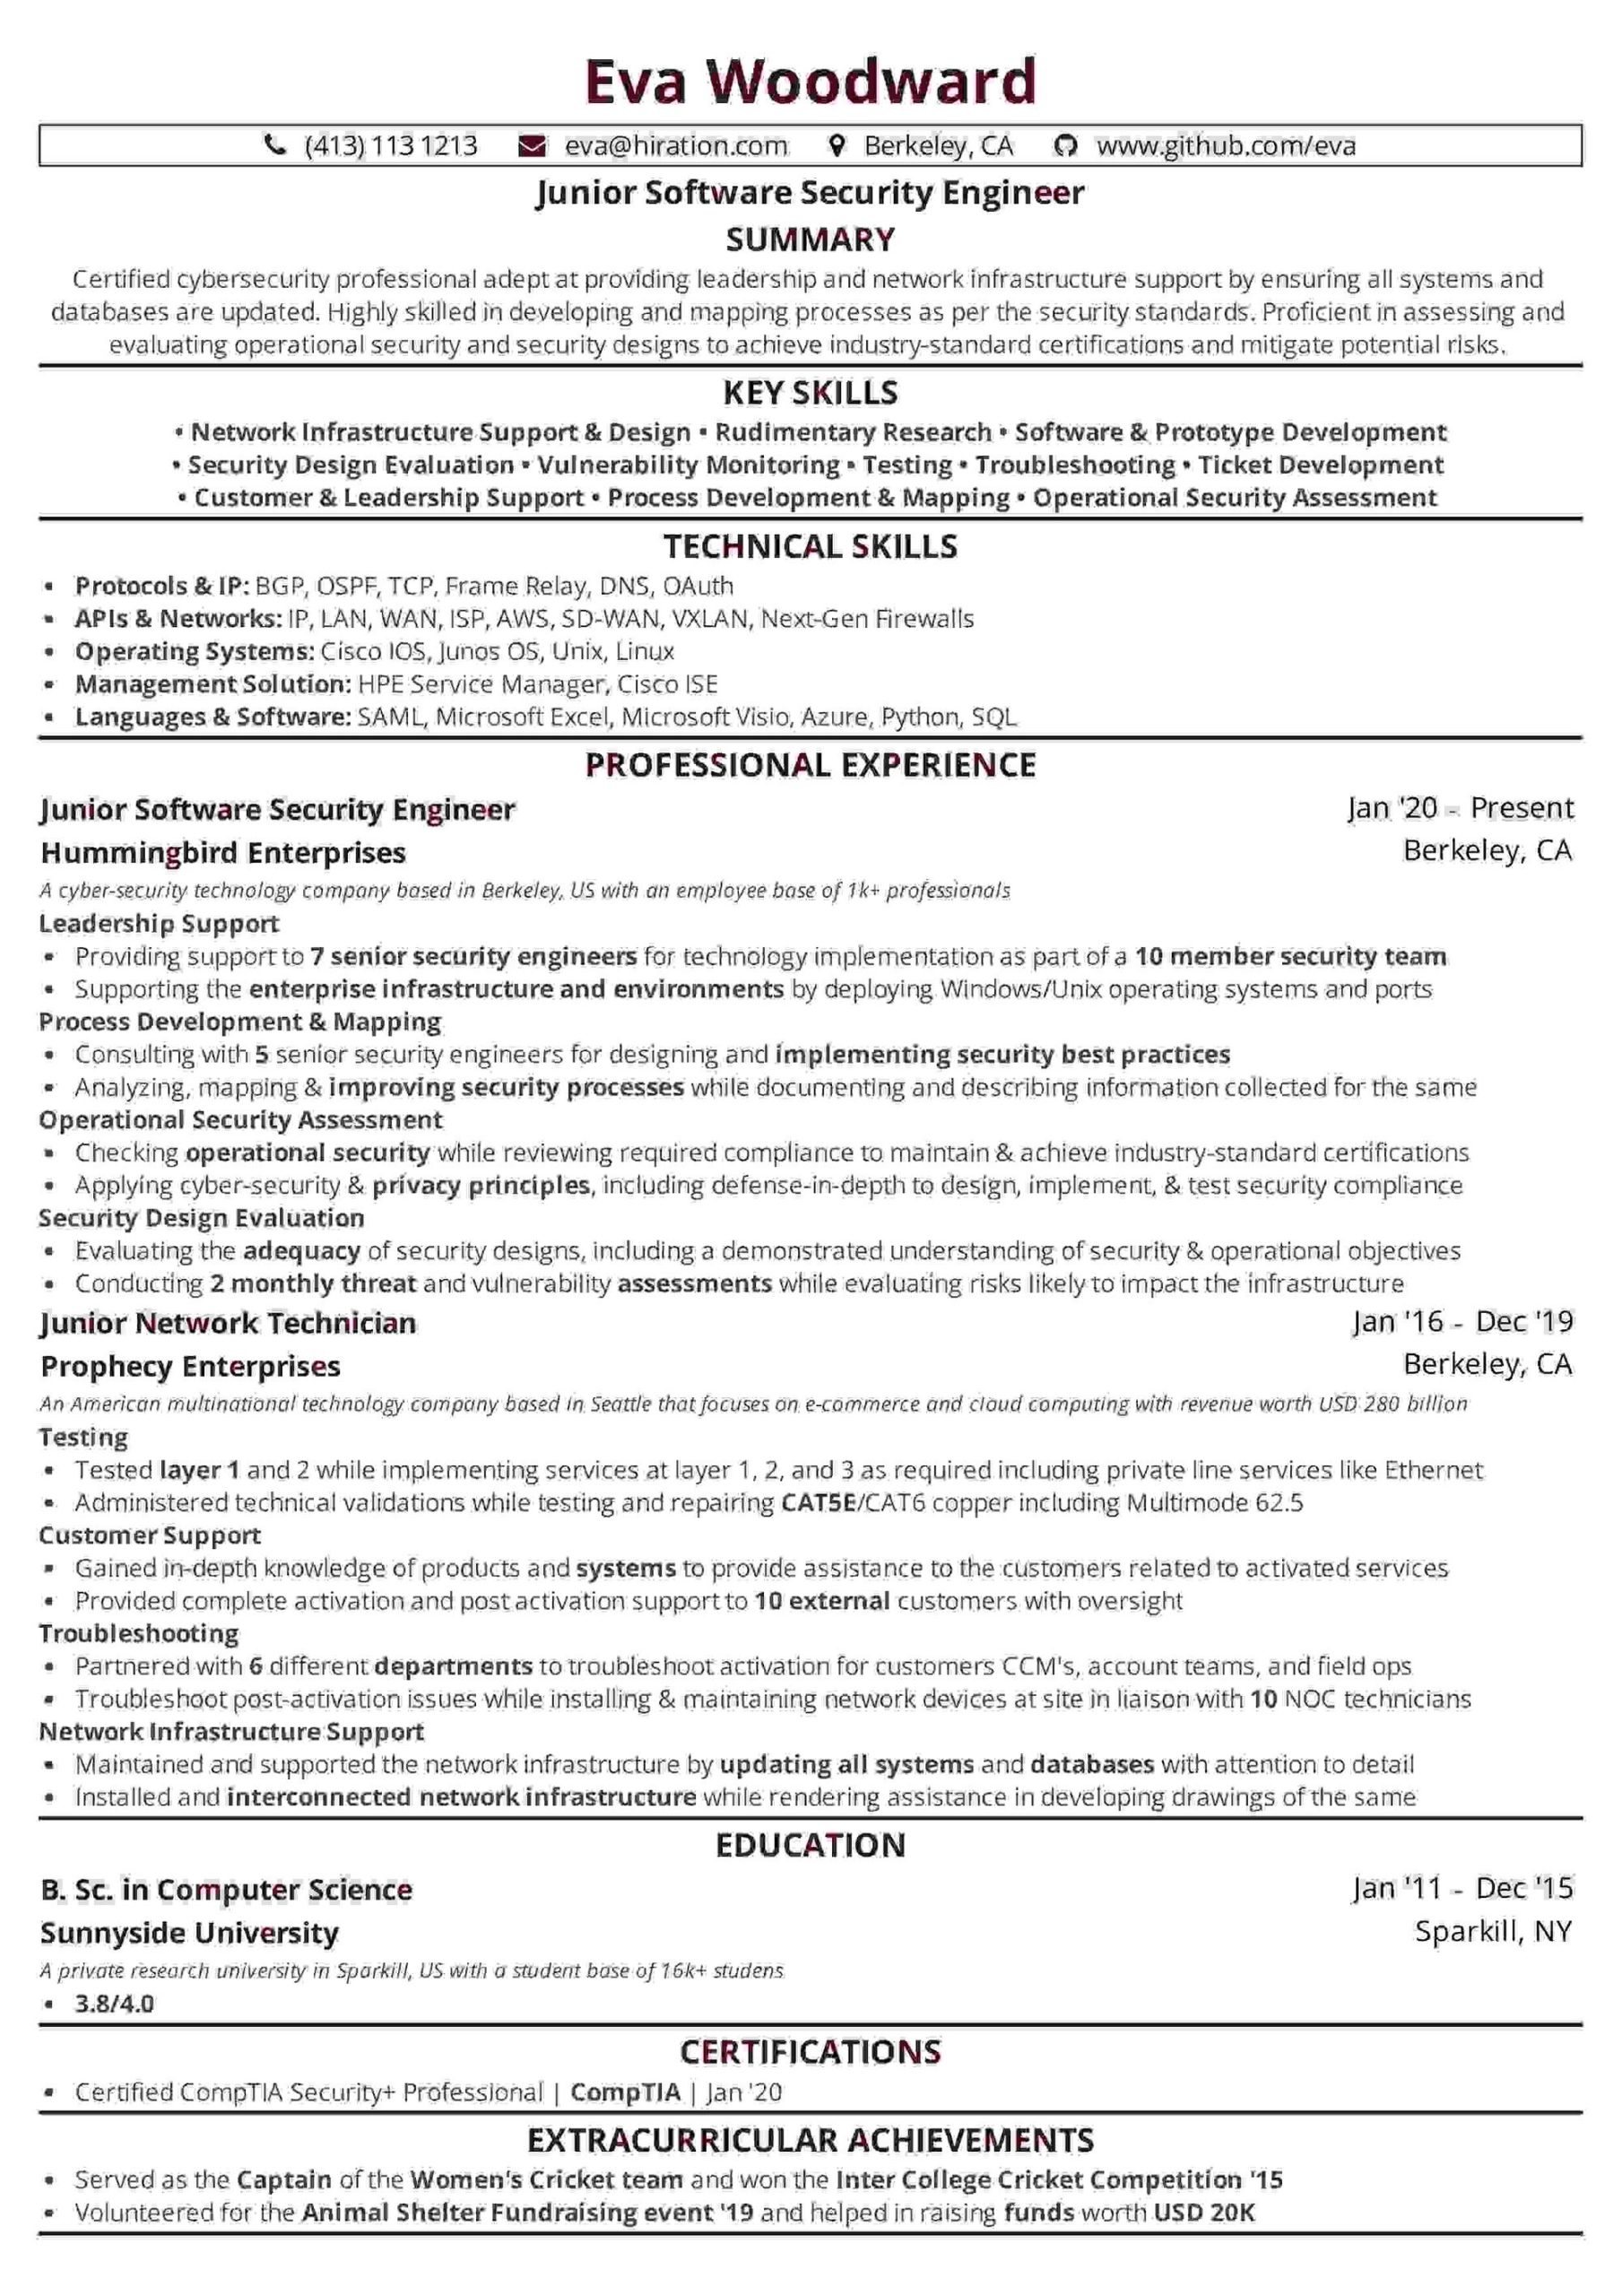 Sample Resume for Data Security Analyst Position Cyber Security Analyst Resume: 2022 Guide with 15lancarrezekiq Examples